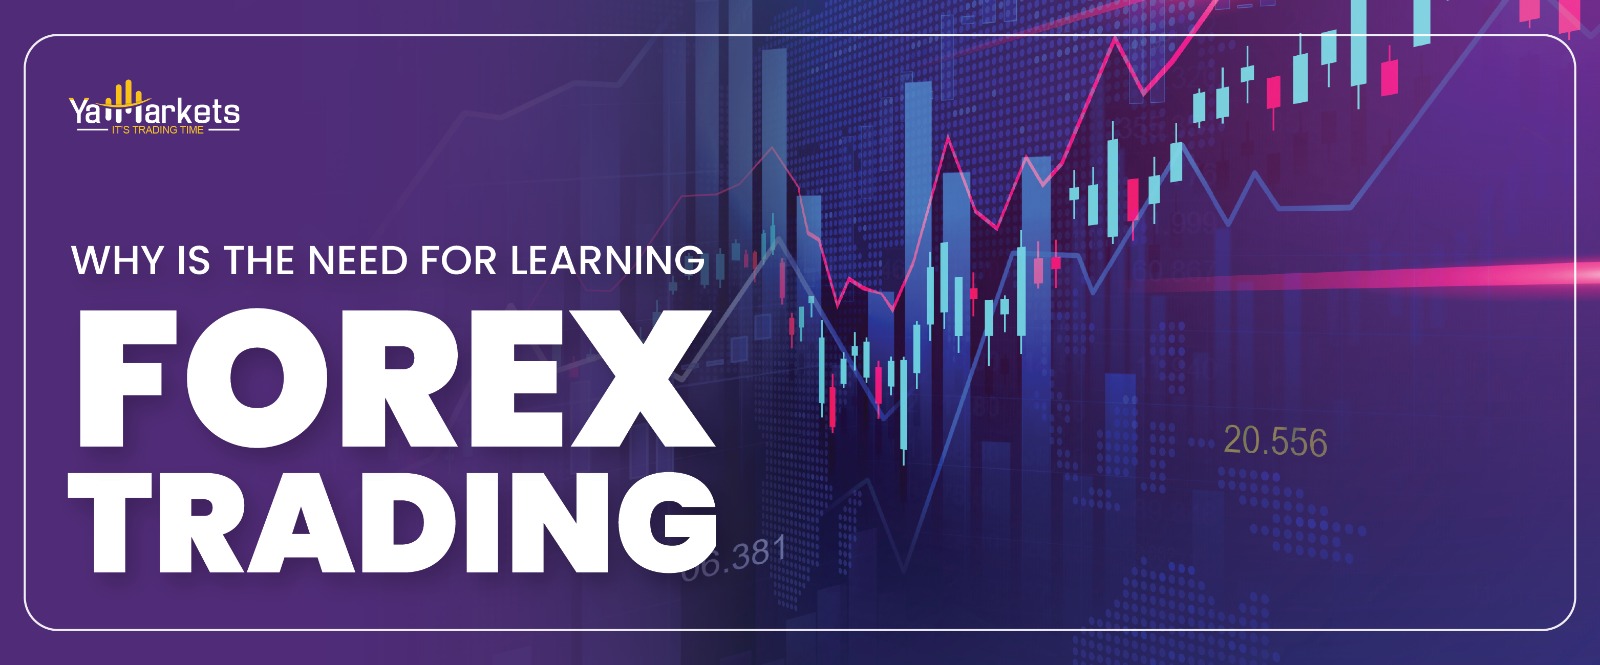 Why is the need for learning Forex Trading